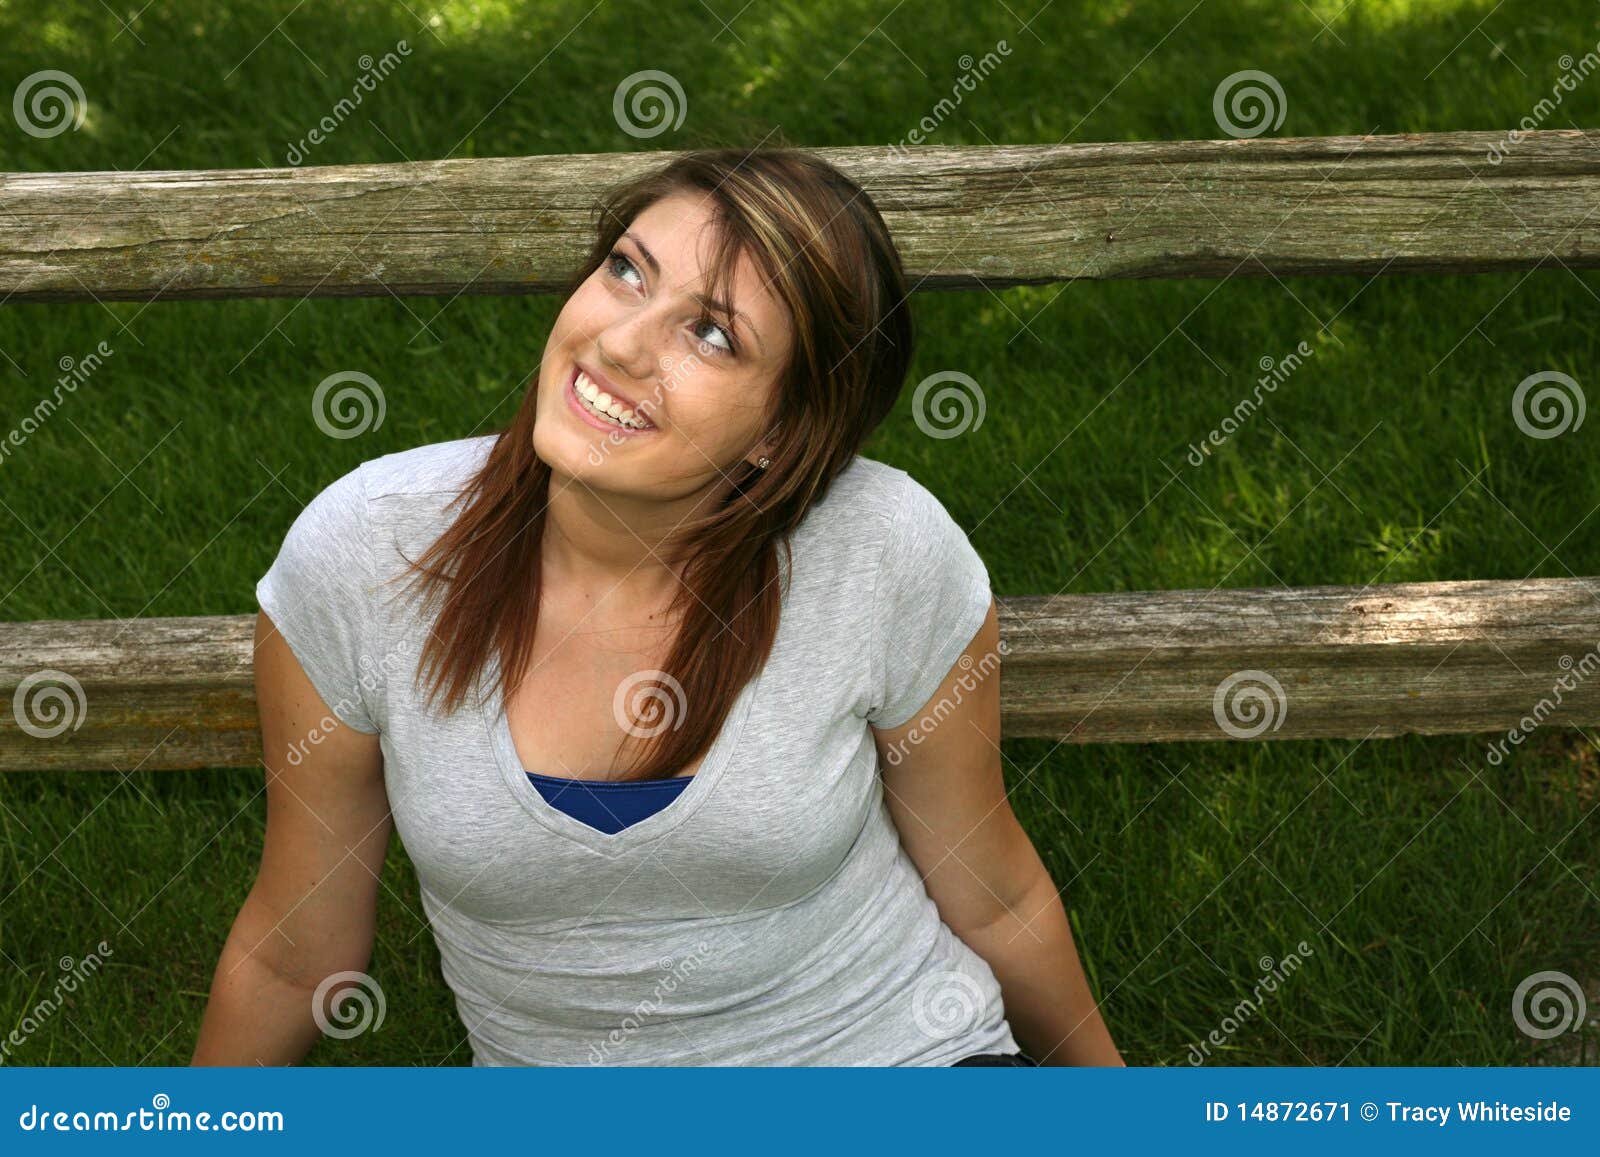 Pretty Teen Girl Smiling Outside Stock Image Image Of Model Look